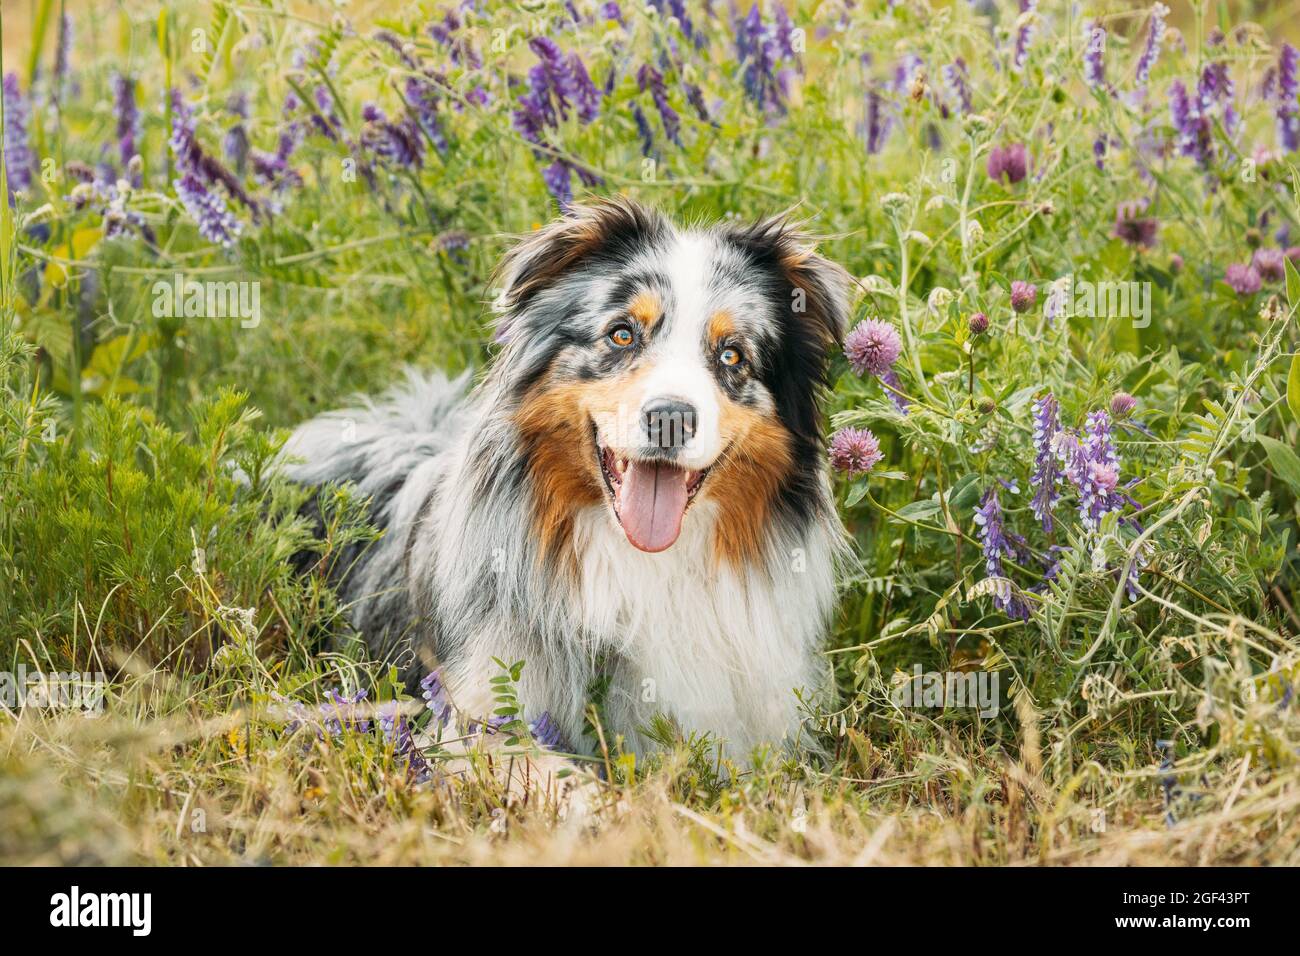 Funny Red And White Australian Shepherd Dog Resting In Green Grass With Purple Blooming Flowers. Aussie Is A Medium-sized Breed Of Dog That Was Stock Photo